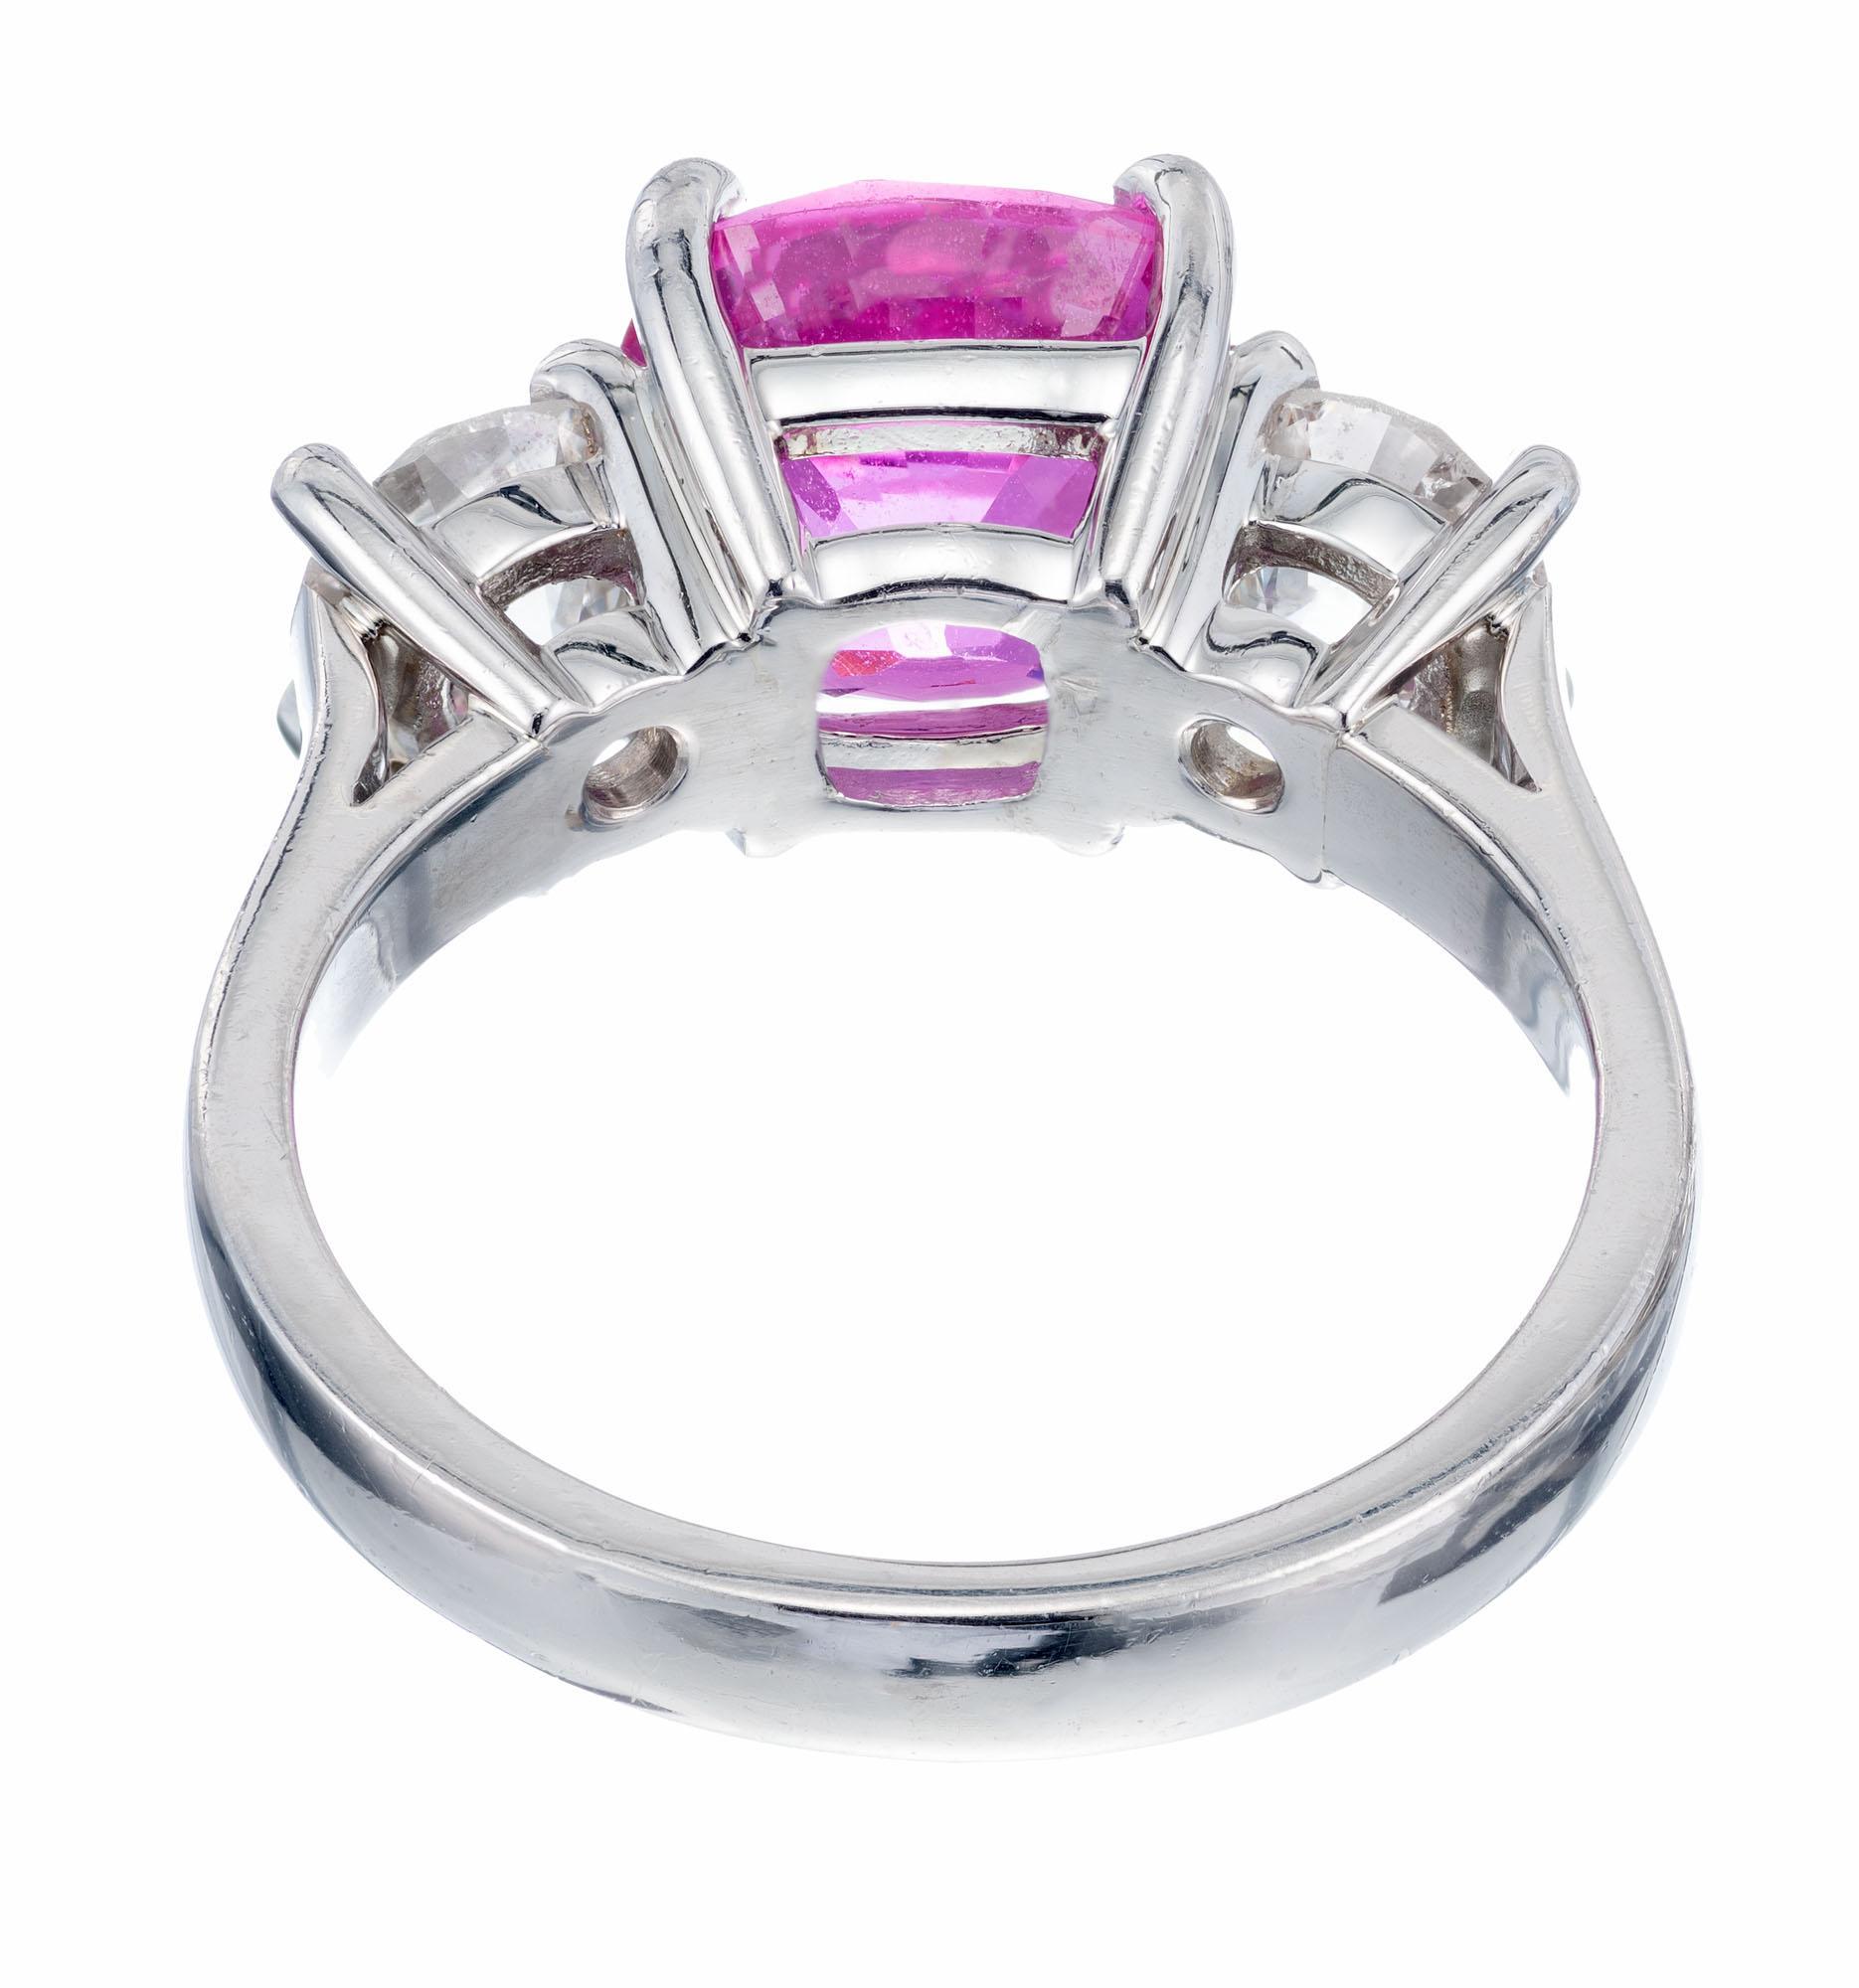 Peter Suchy GIA 4.02 Carat Pink Sapphire Diamond Platinum Engagement Ring In Excellent Condition For Sale In Stamford, CT